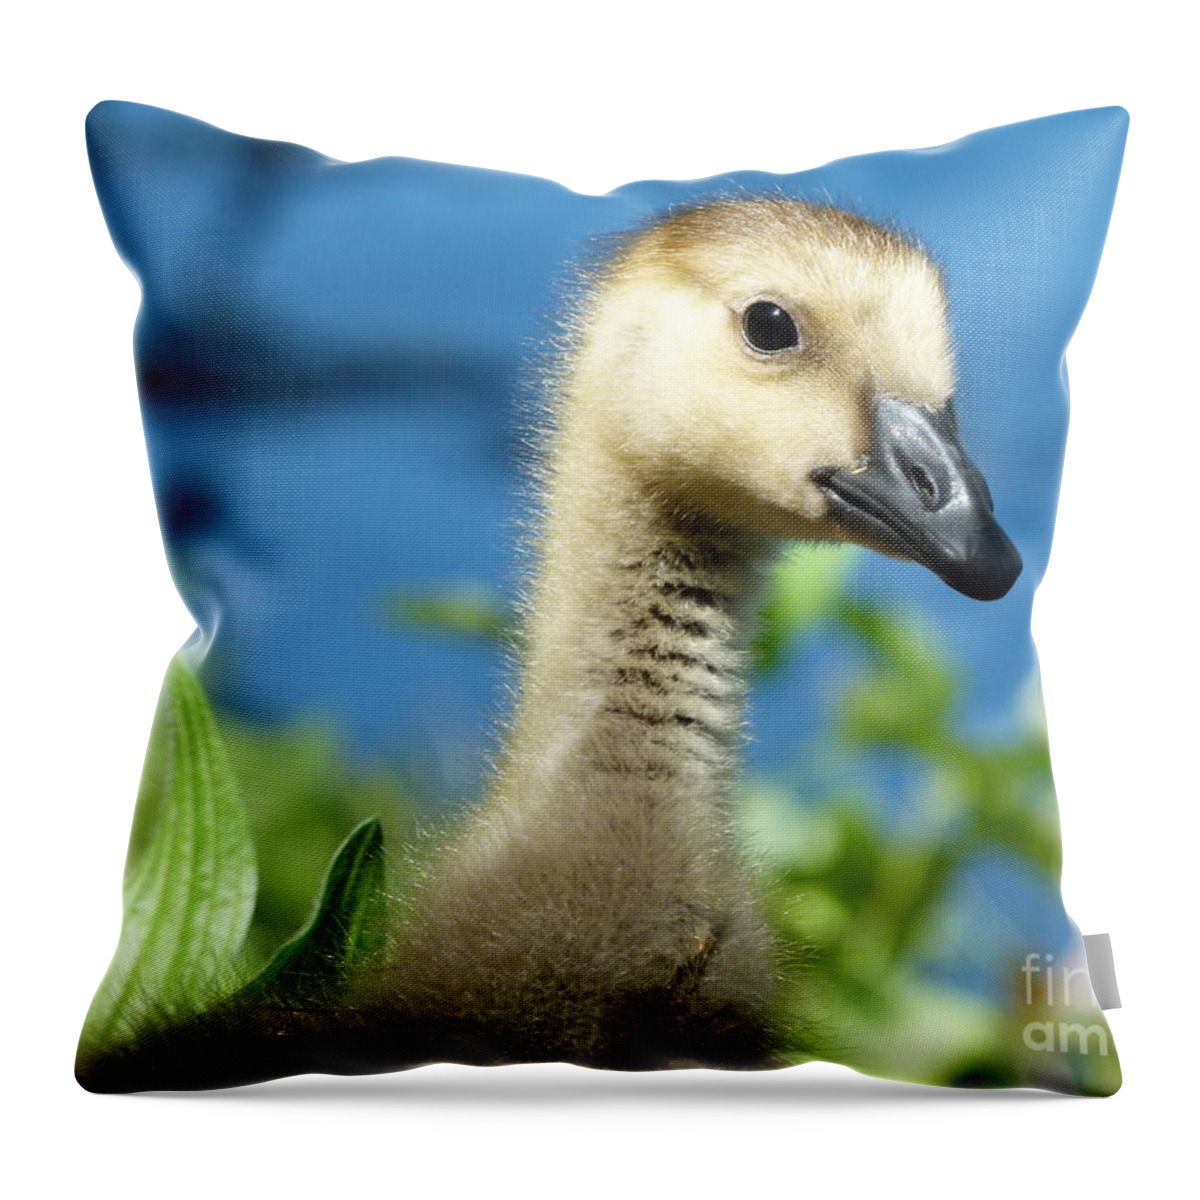 Gosling Throw Pillow featuring the photograph Oh Hi by Jane Ford